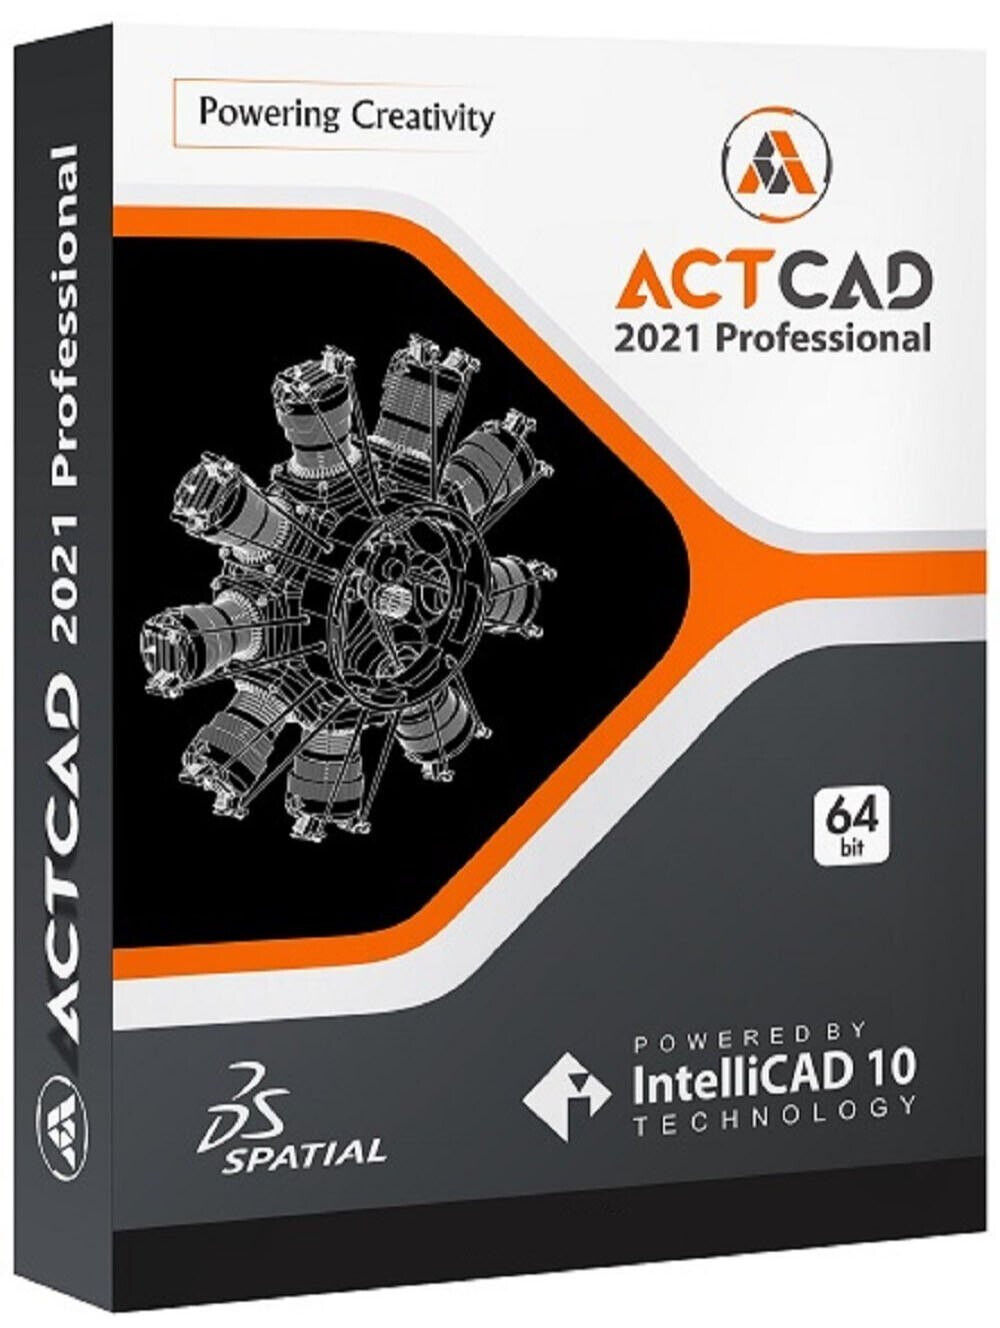 ActCAD Pro v10 for Windows (2D Drafting and 3D Modeling CAD soft)